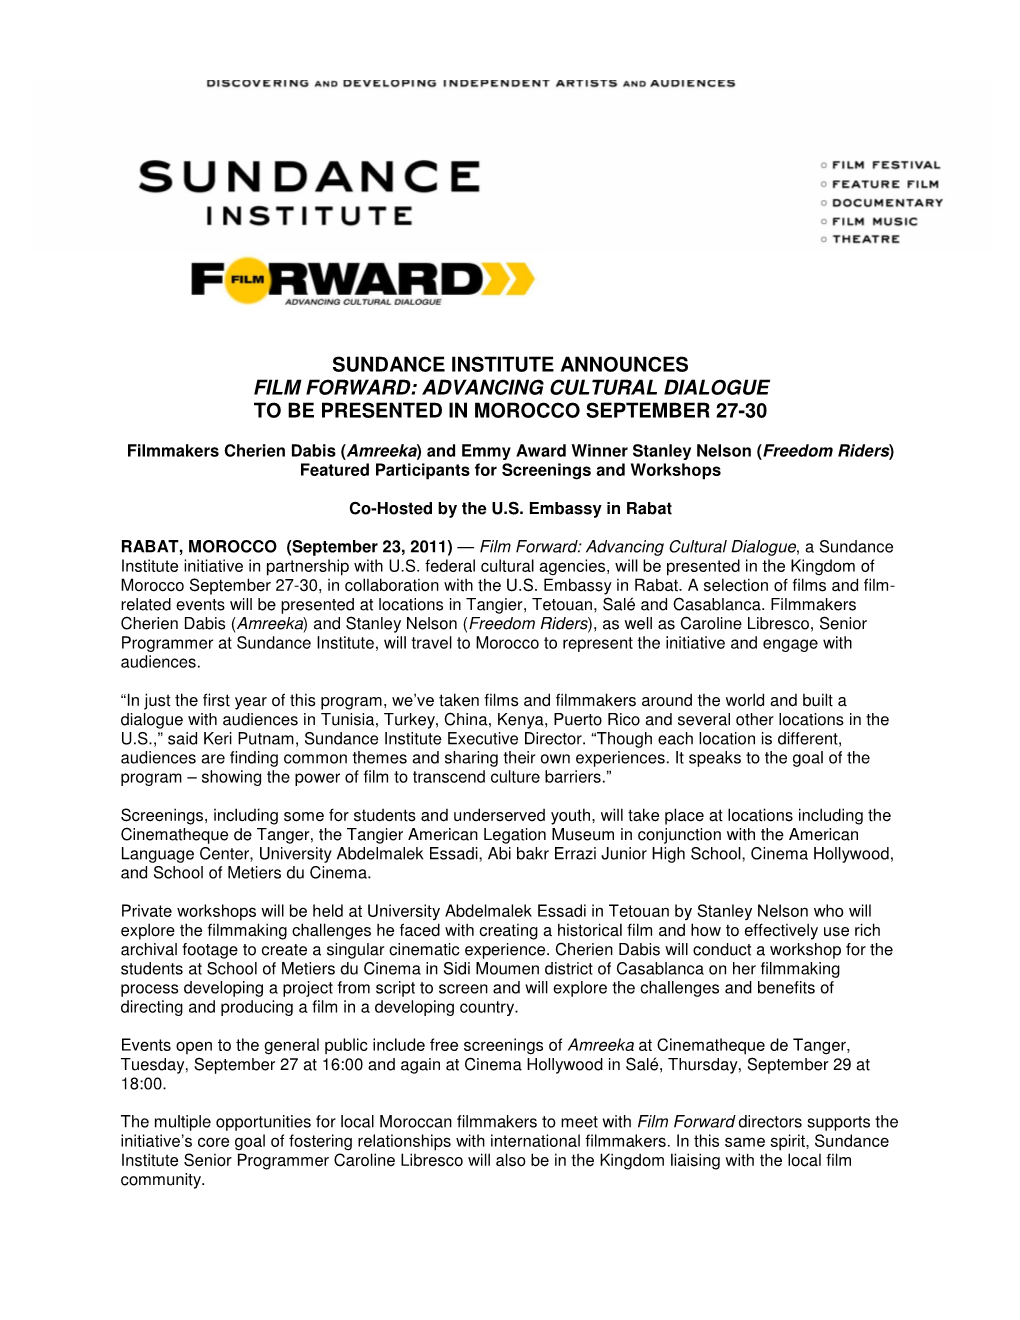 Sundance Institute Announces Film Forward: Advancing Cultural Dialogue to Be Presented in Morocco September 27-30